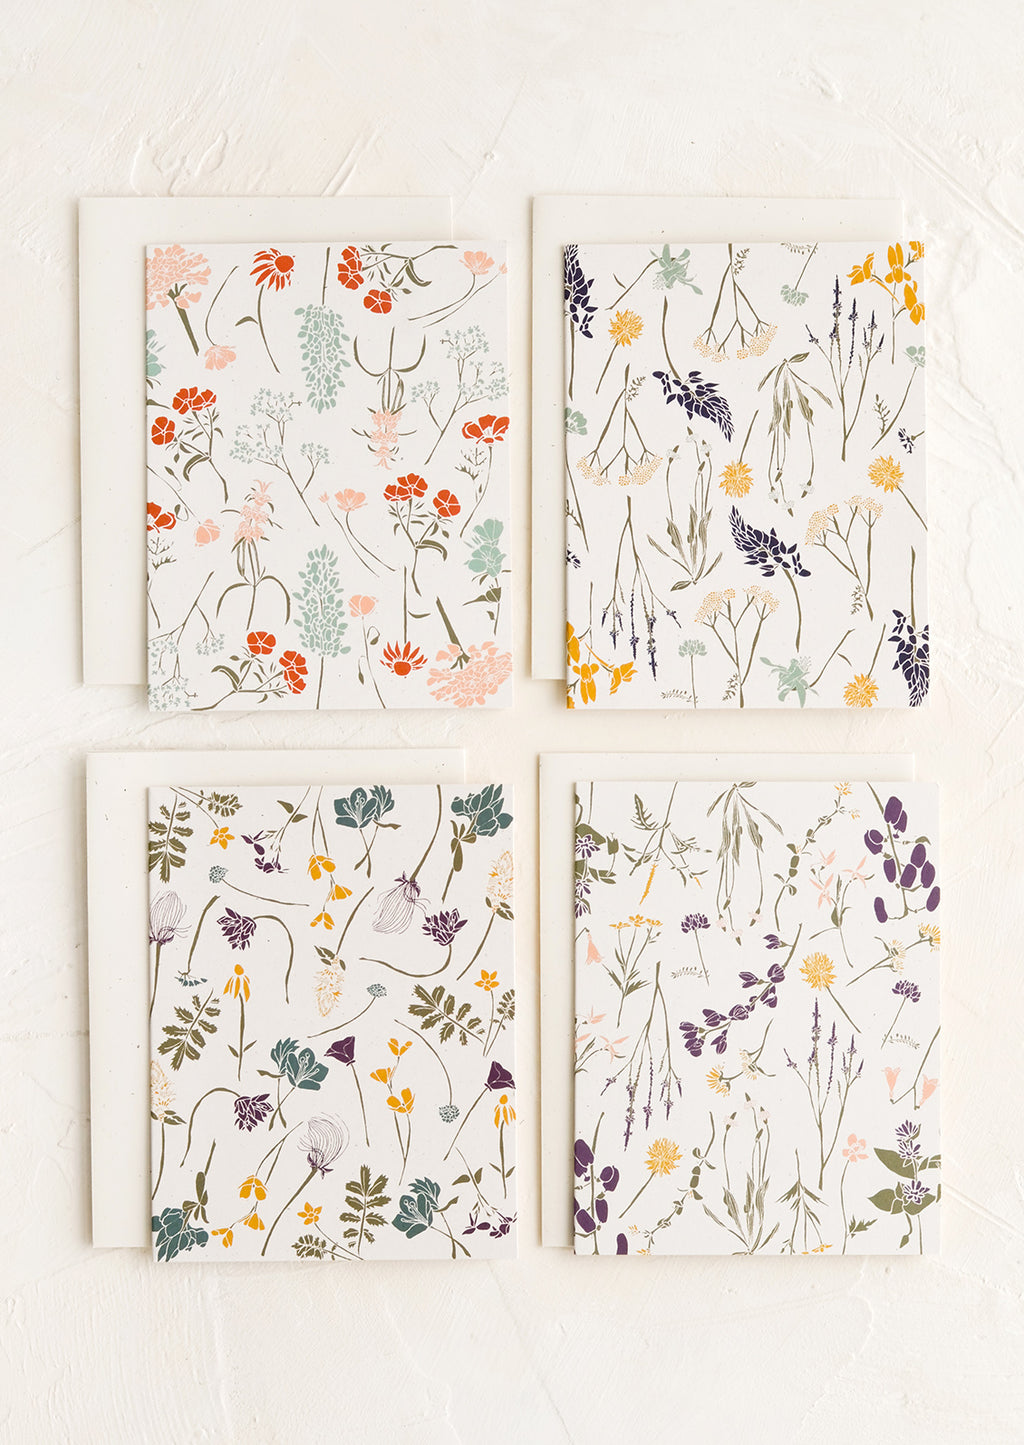 2: Four cards with wildflower patterns in slightly different designs and colors.